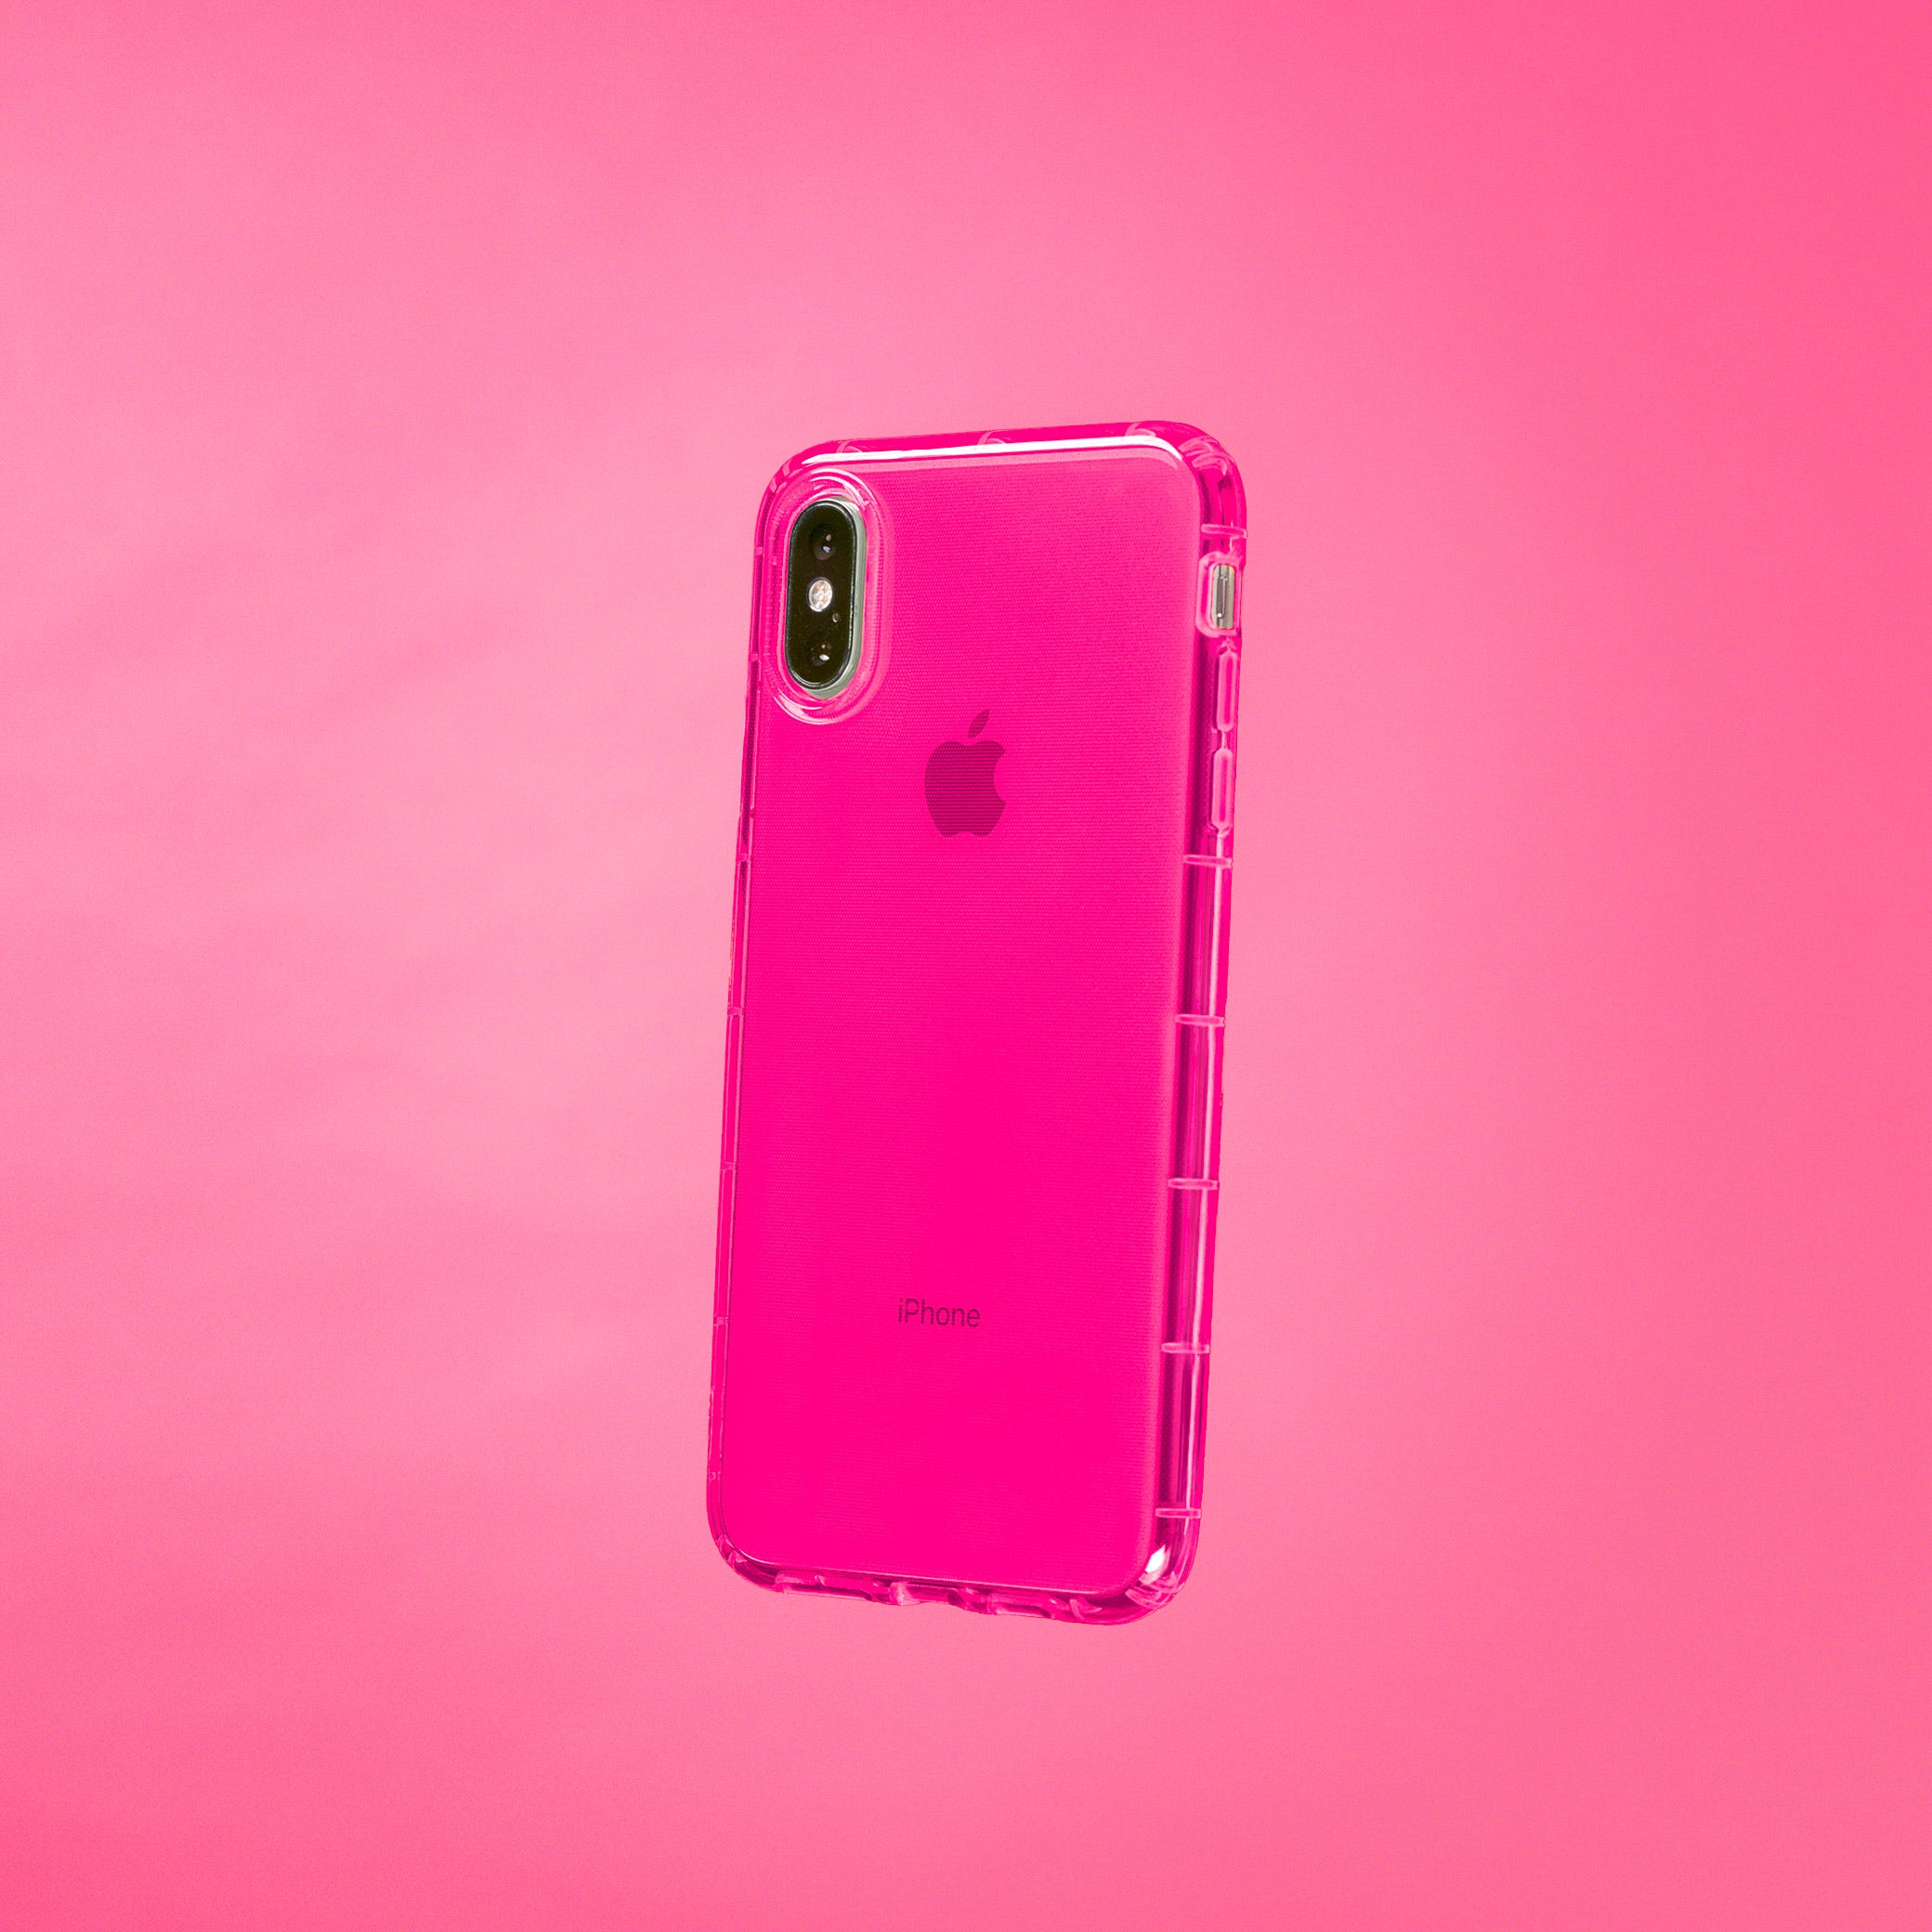 Highlighter Case for iPhone Xs & iPhone X - Eye-Catching Hot Pink